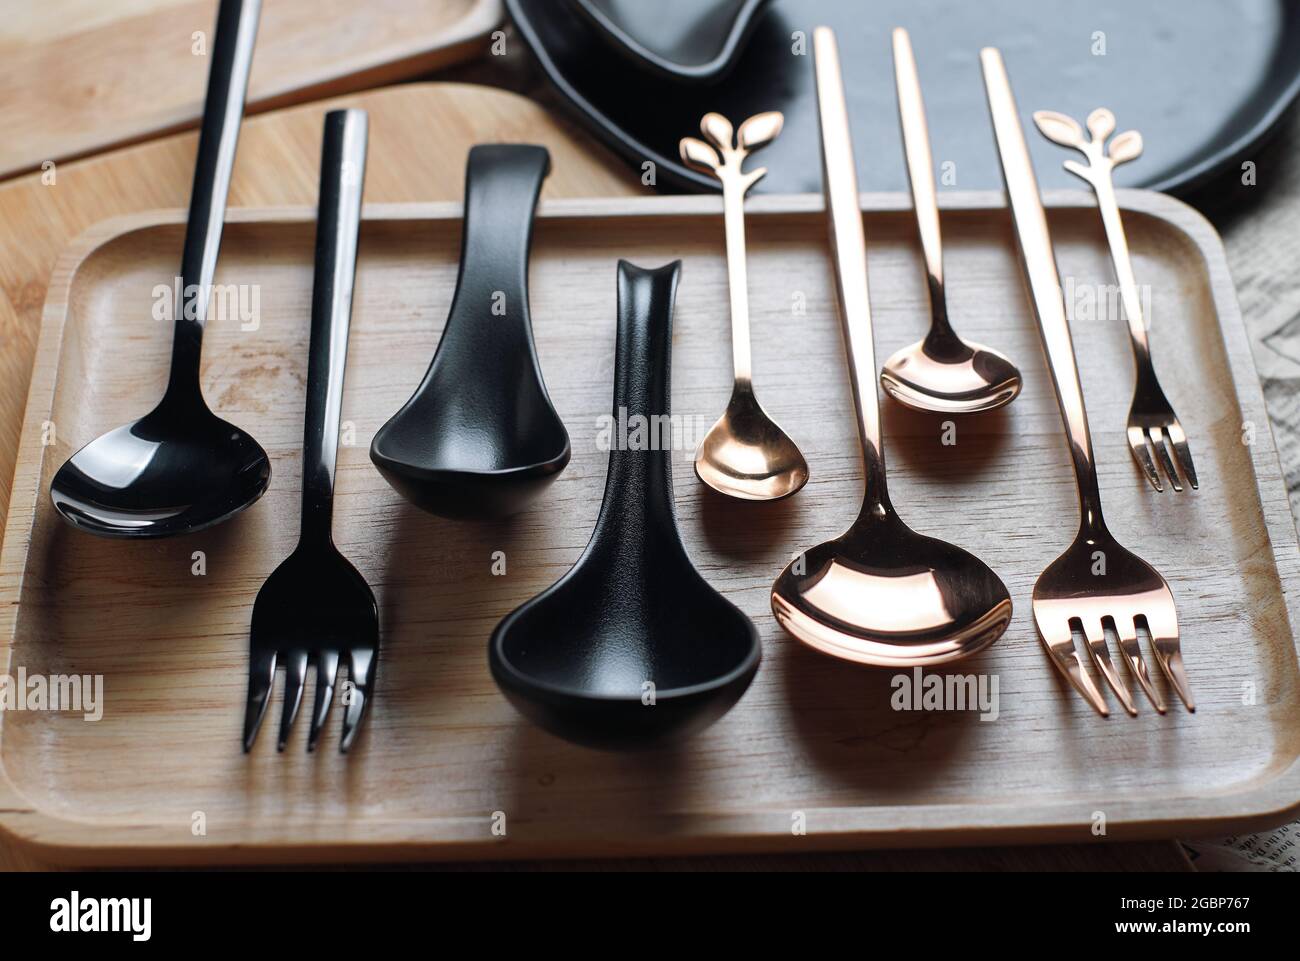 Cutlery is arranged on a wooden tray Stock Photo